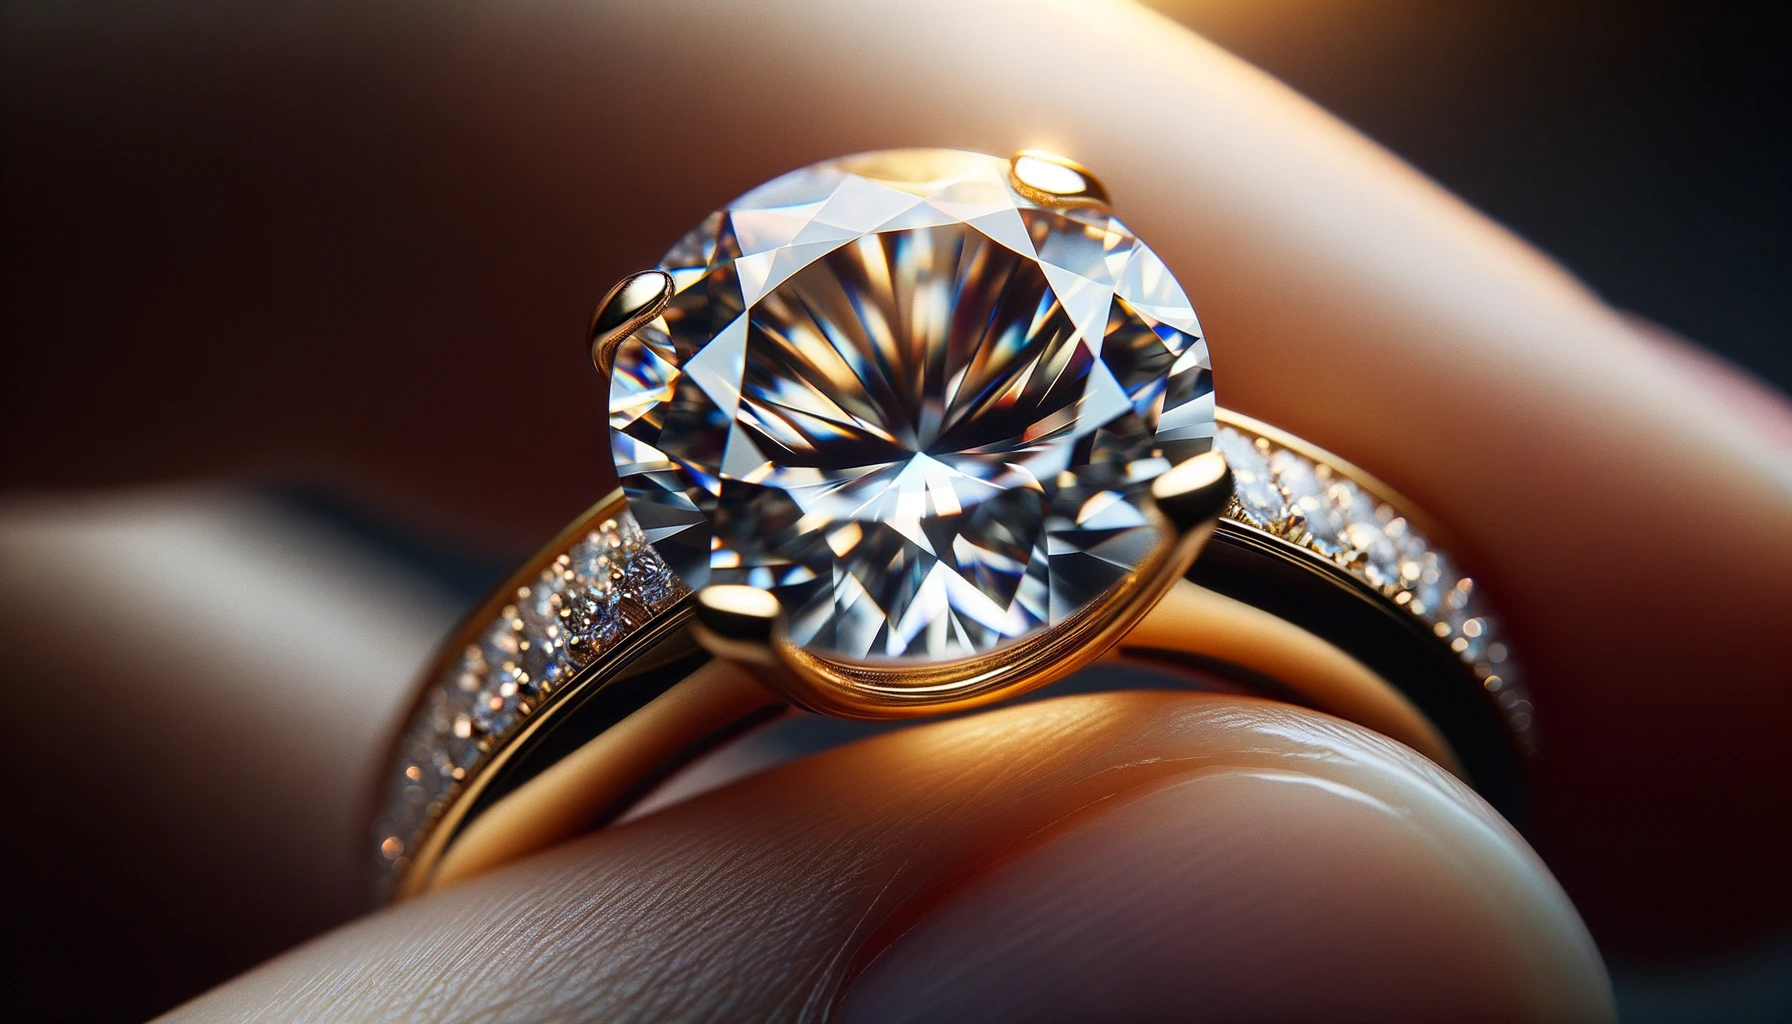 A close-up photograph of a sparkling diamond set in a gold ring. The diamon